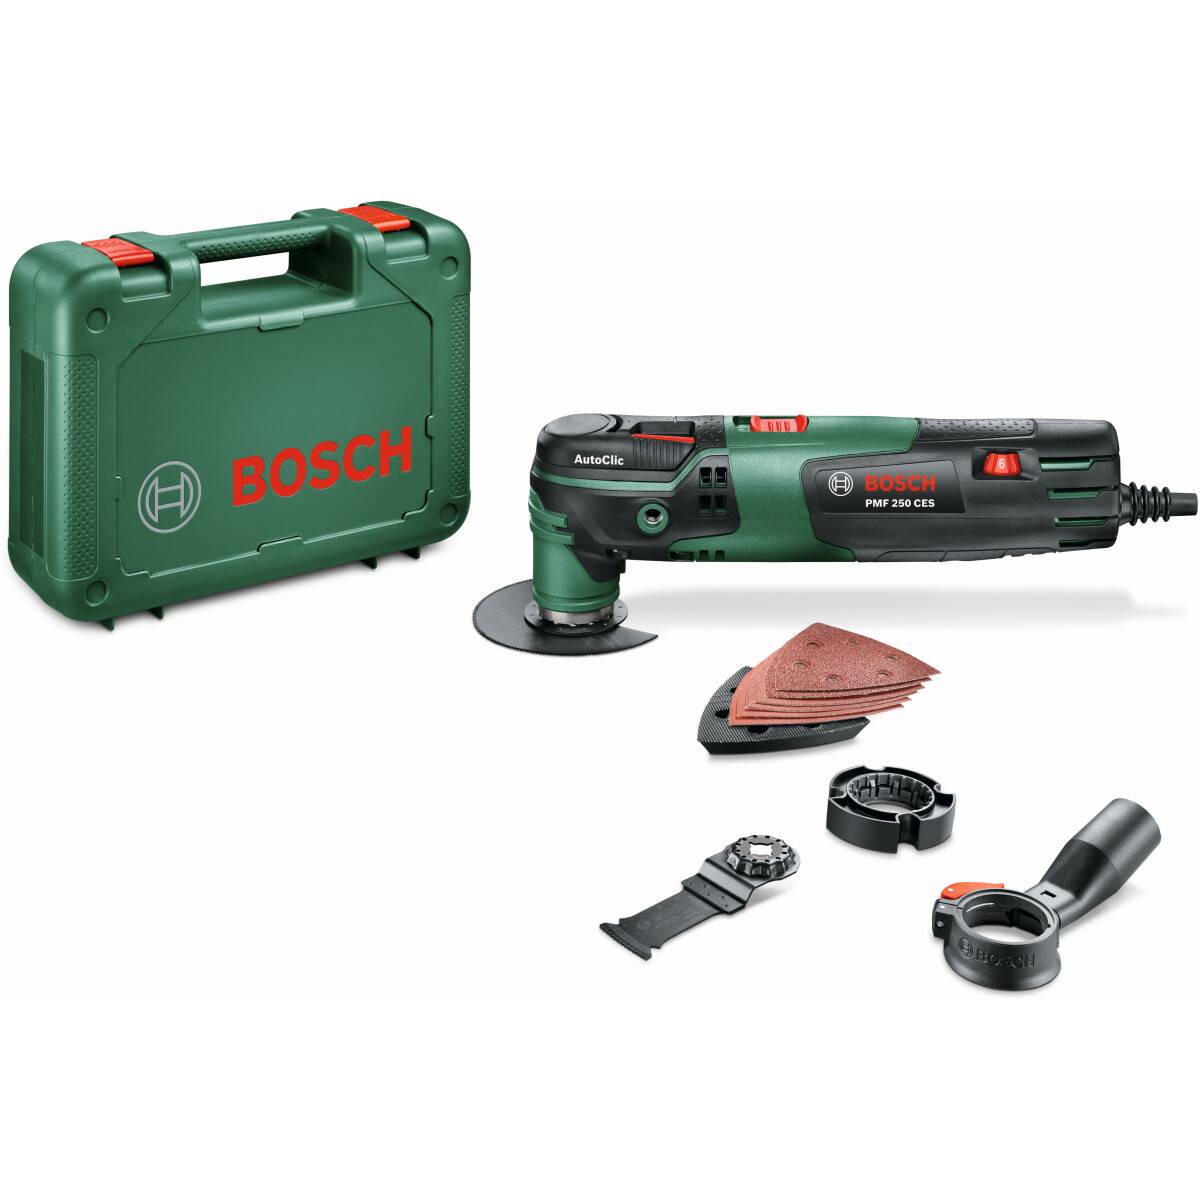 Bosch PMF 250 CES 250w Oscillating Multi Tool Starlock in Carry